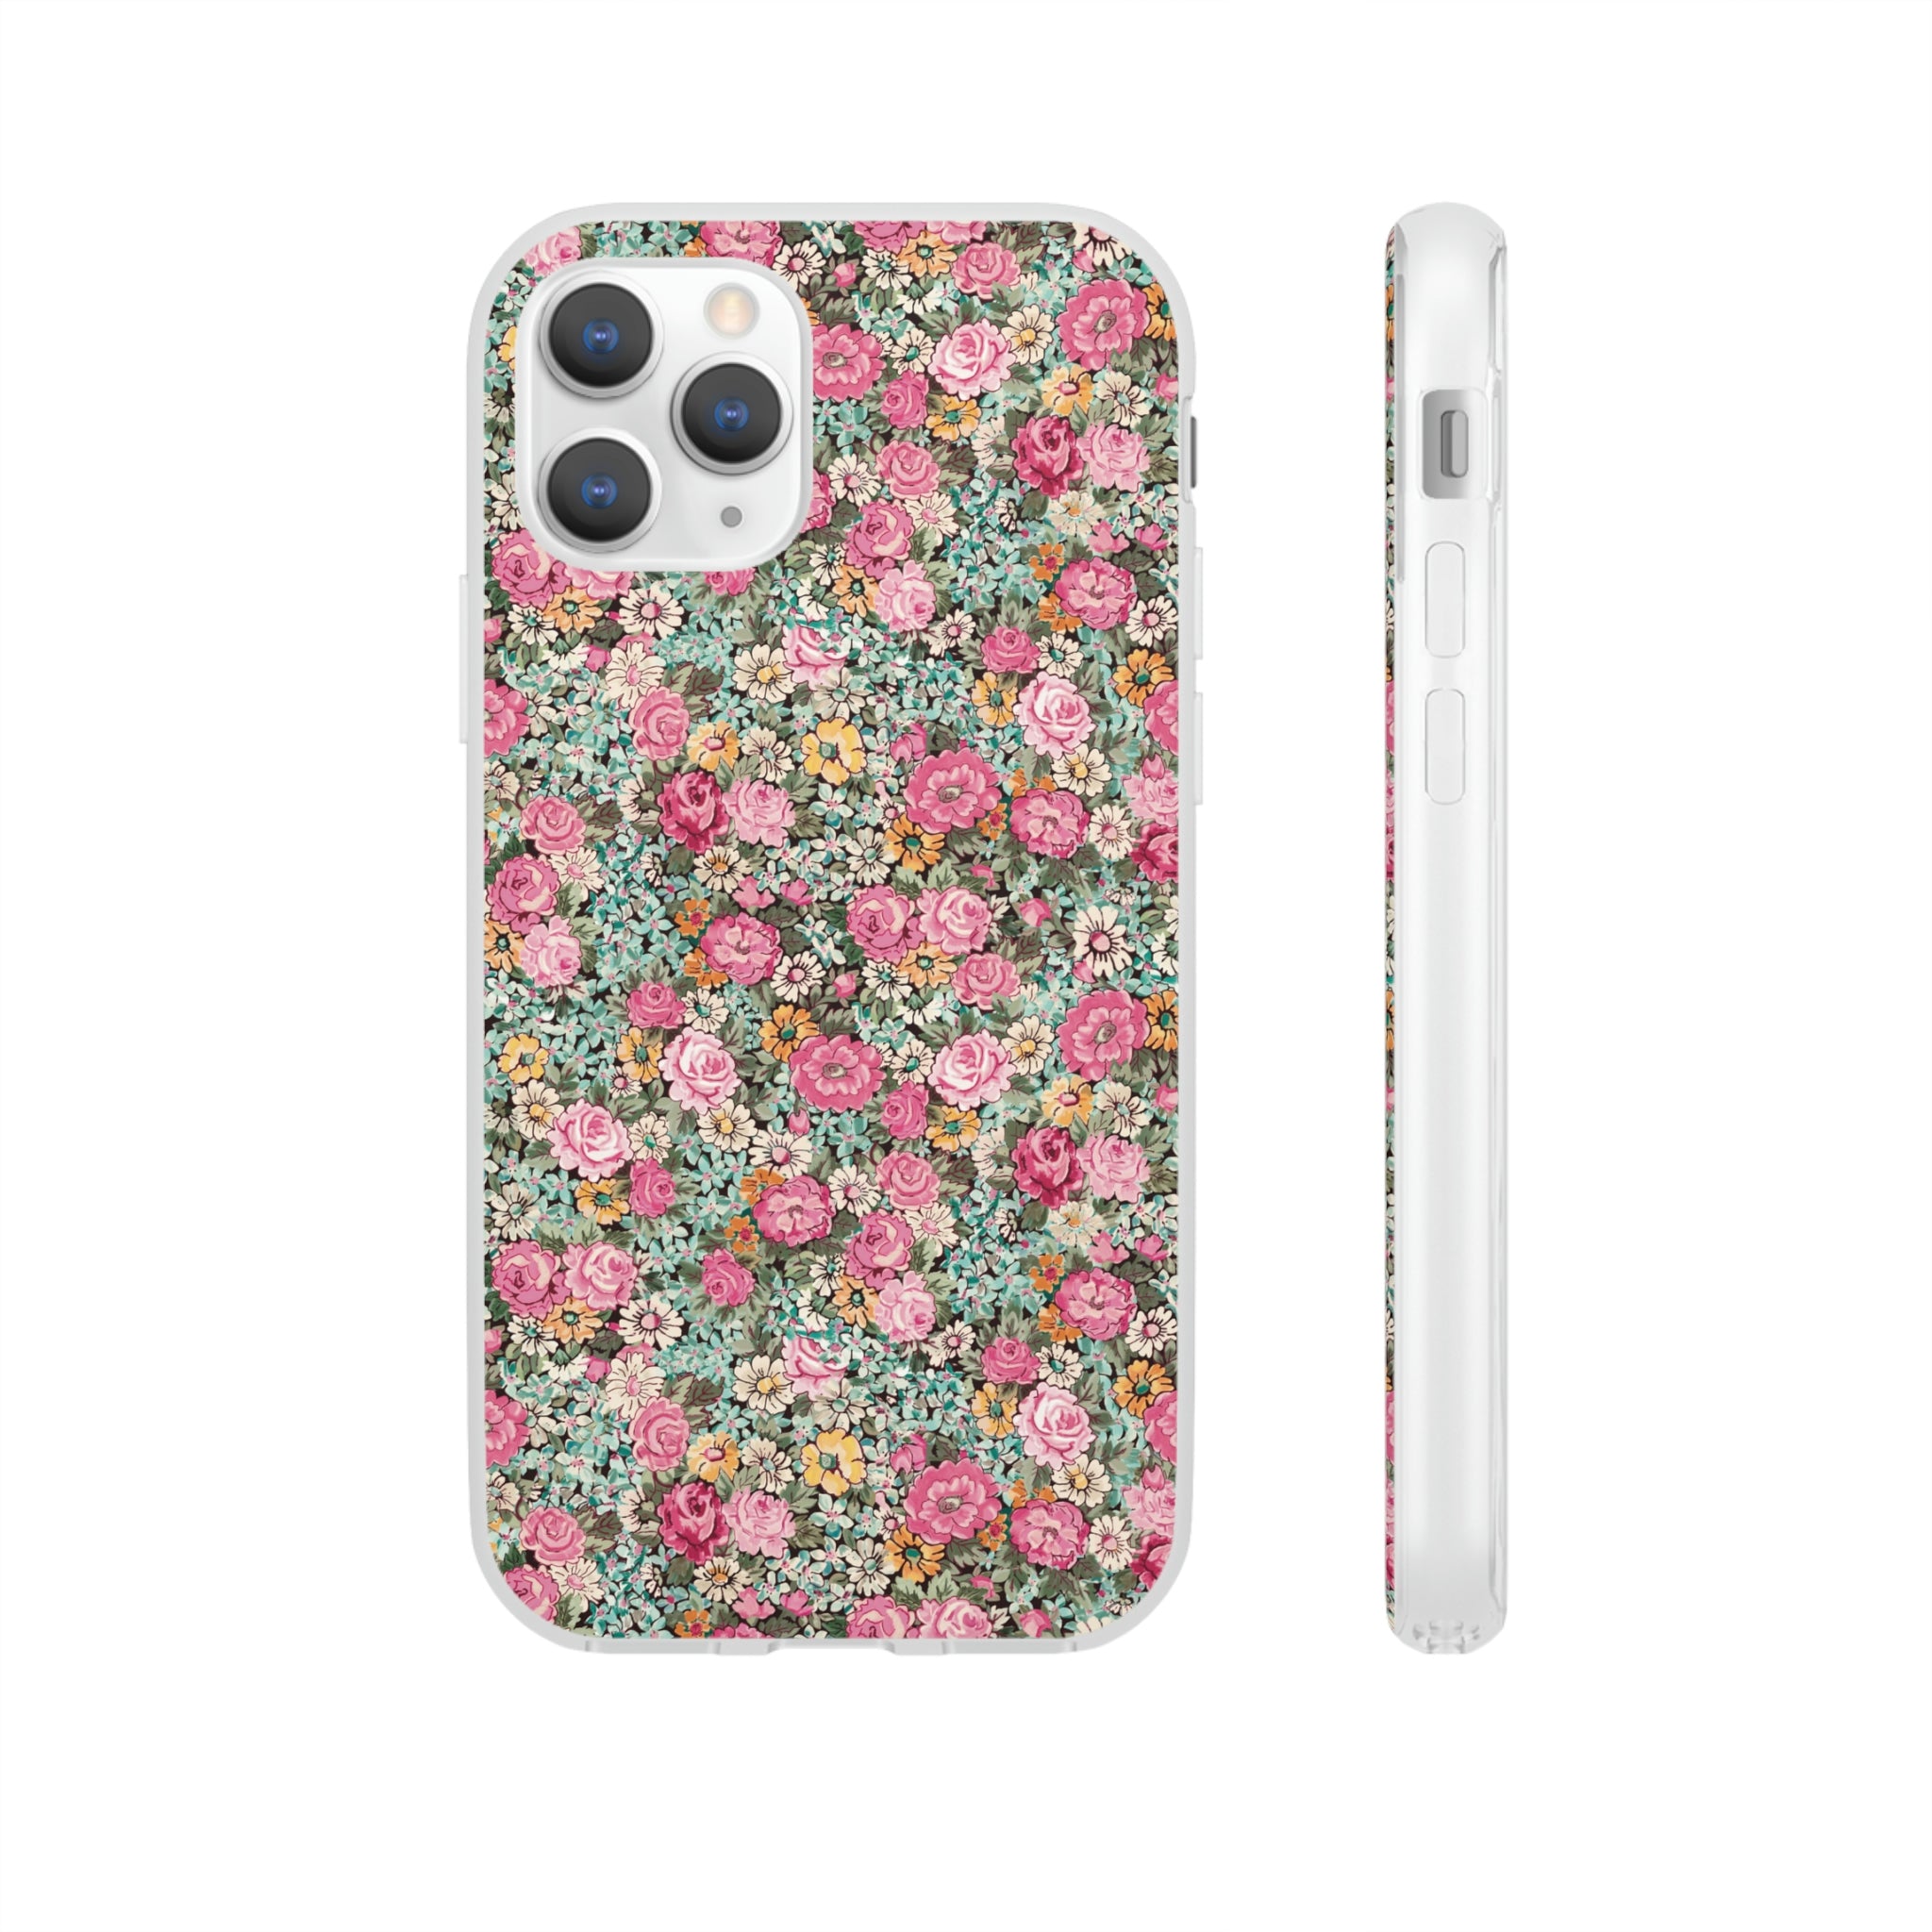 Flexi Cases / bright pink floral